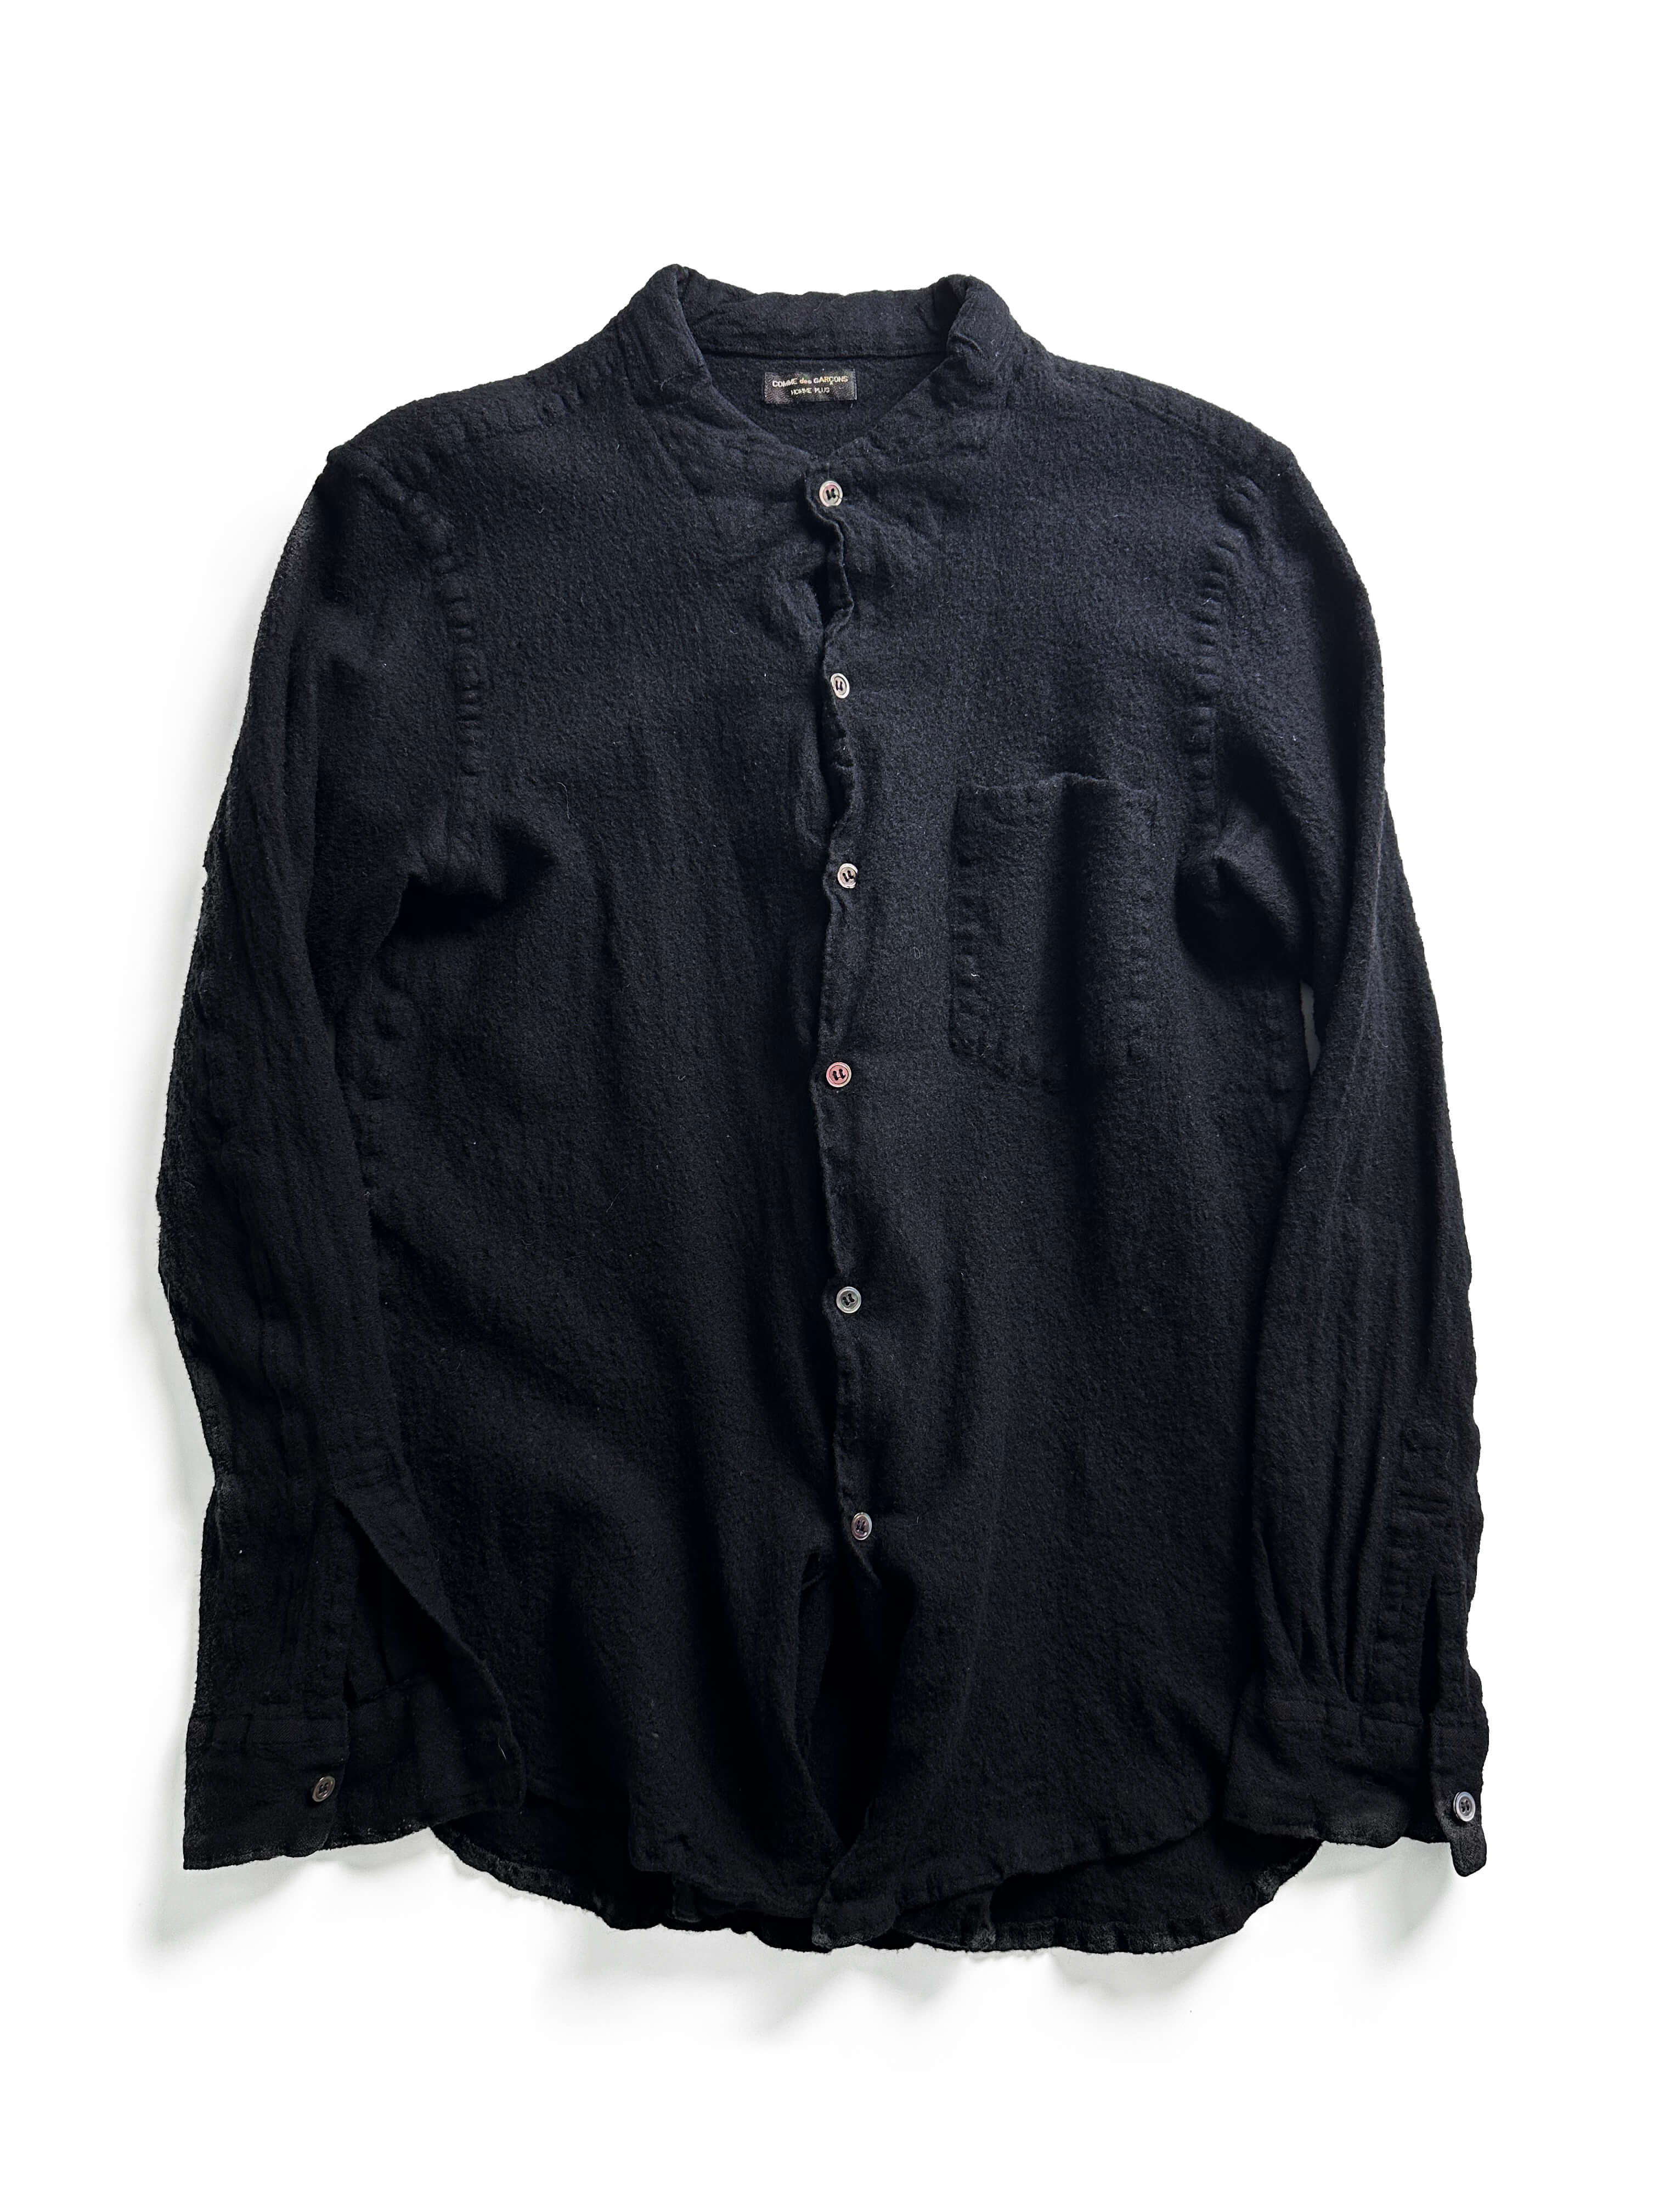 COMME des GARCONS HOMME PLUS 1998aw boiled wool shirts